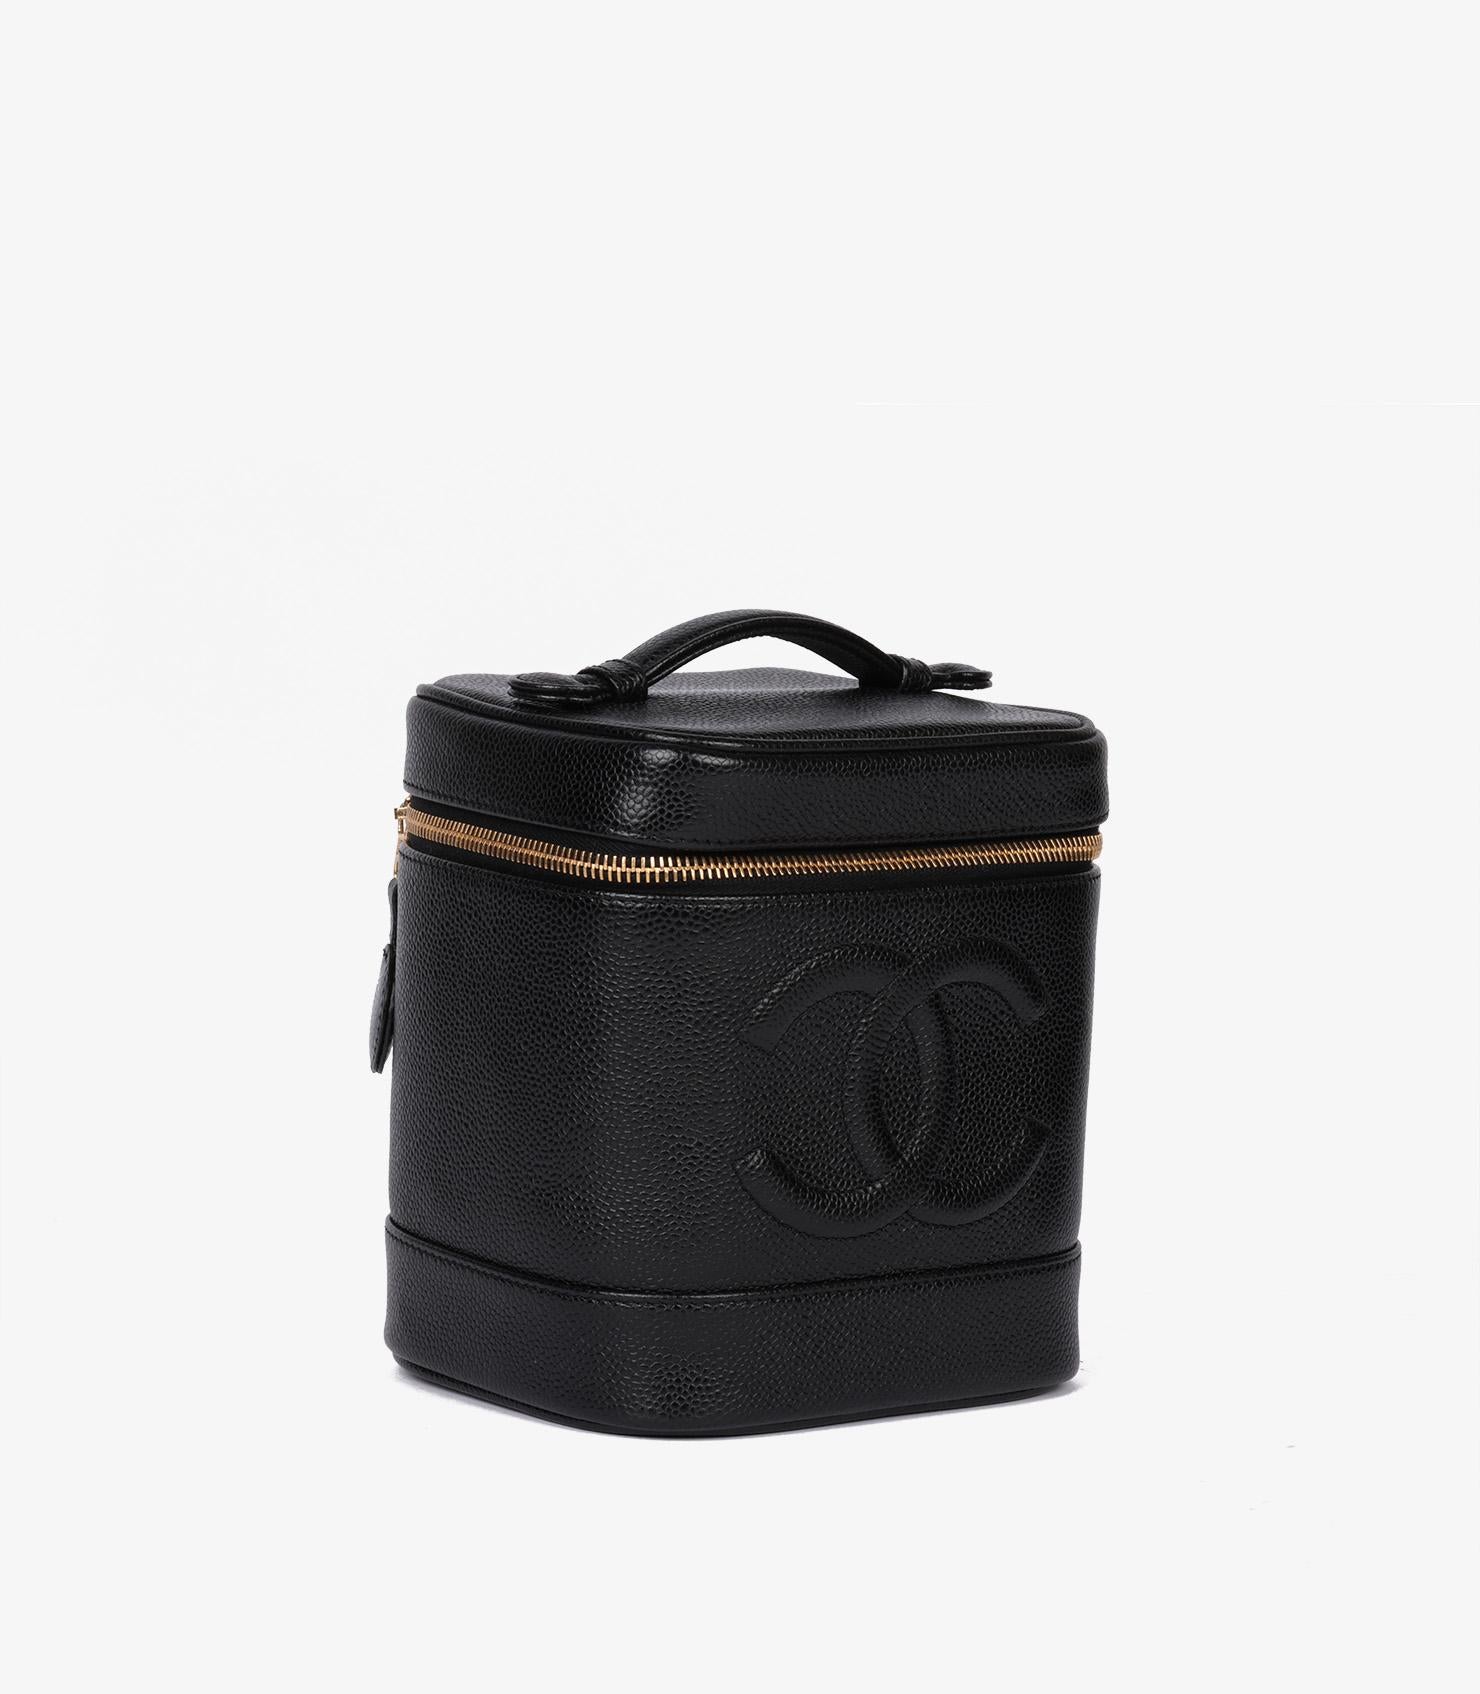 Chanel Black Caviar Leather Vintage Timeless Vanity Case

Brand- Chanel
Model- Timeless Vanity Case
Product Type- Case
Serial Number- 74*****
Age- Circa 2003
Accompanied By- Chanel Dust Bag, Authenticity Card
Colour- Black
Hardware-